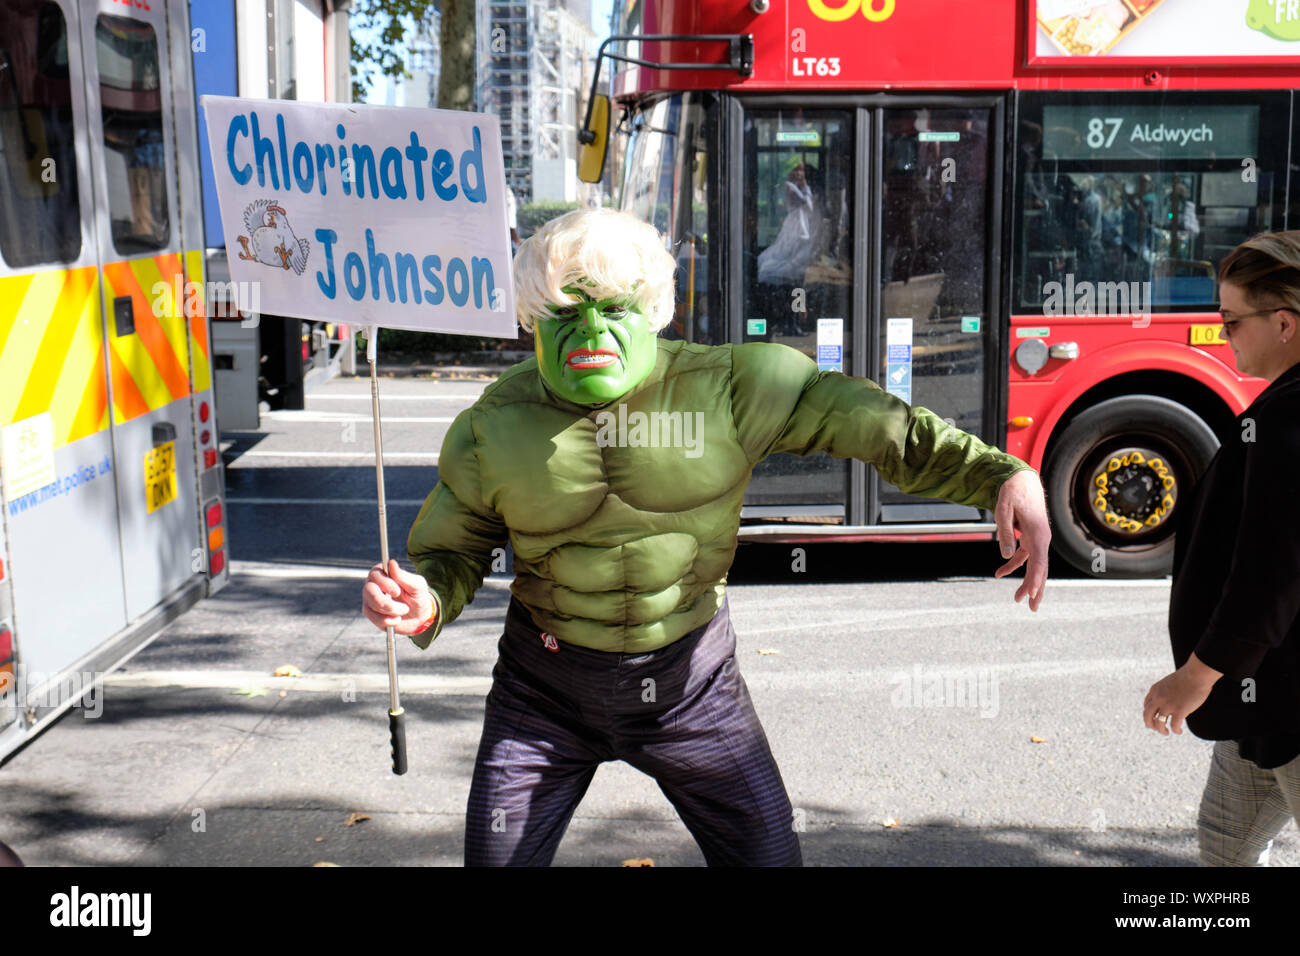 Pro Remain supporters in Hulk costume with Chlorinated Johnson sign front on Supreme Court in London Stock Photo